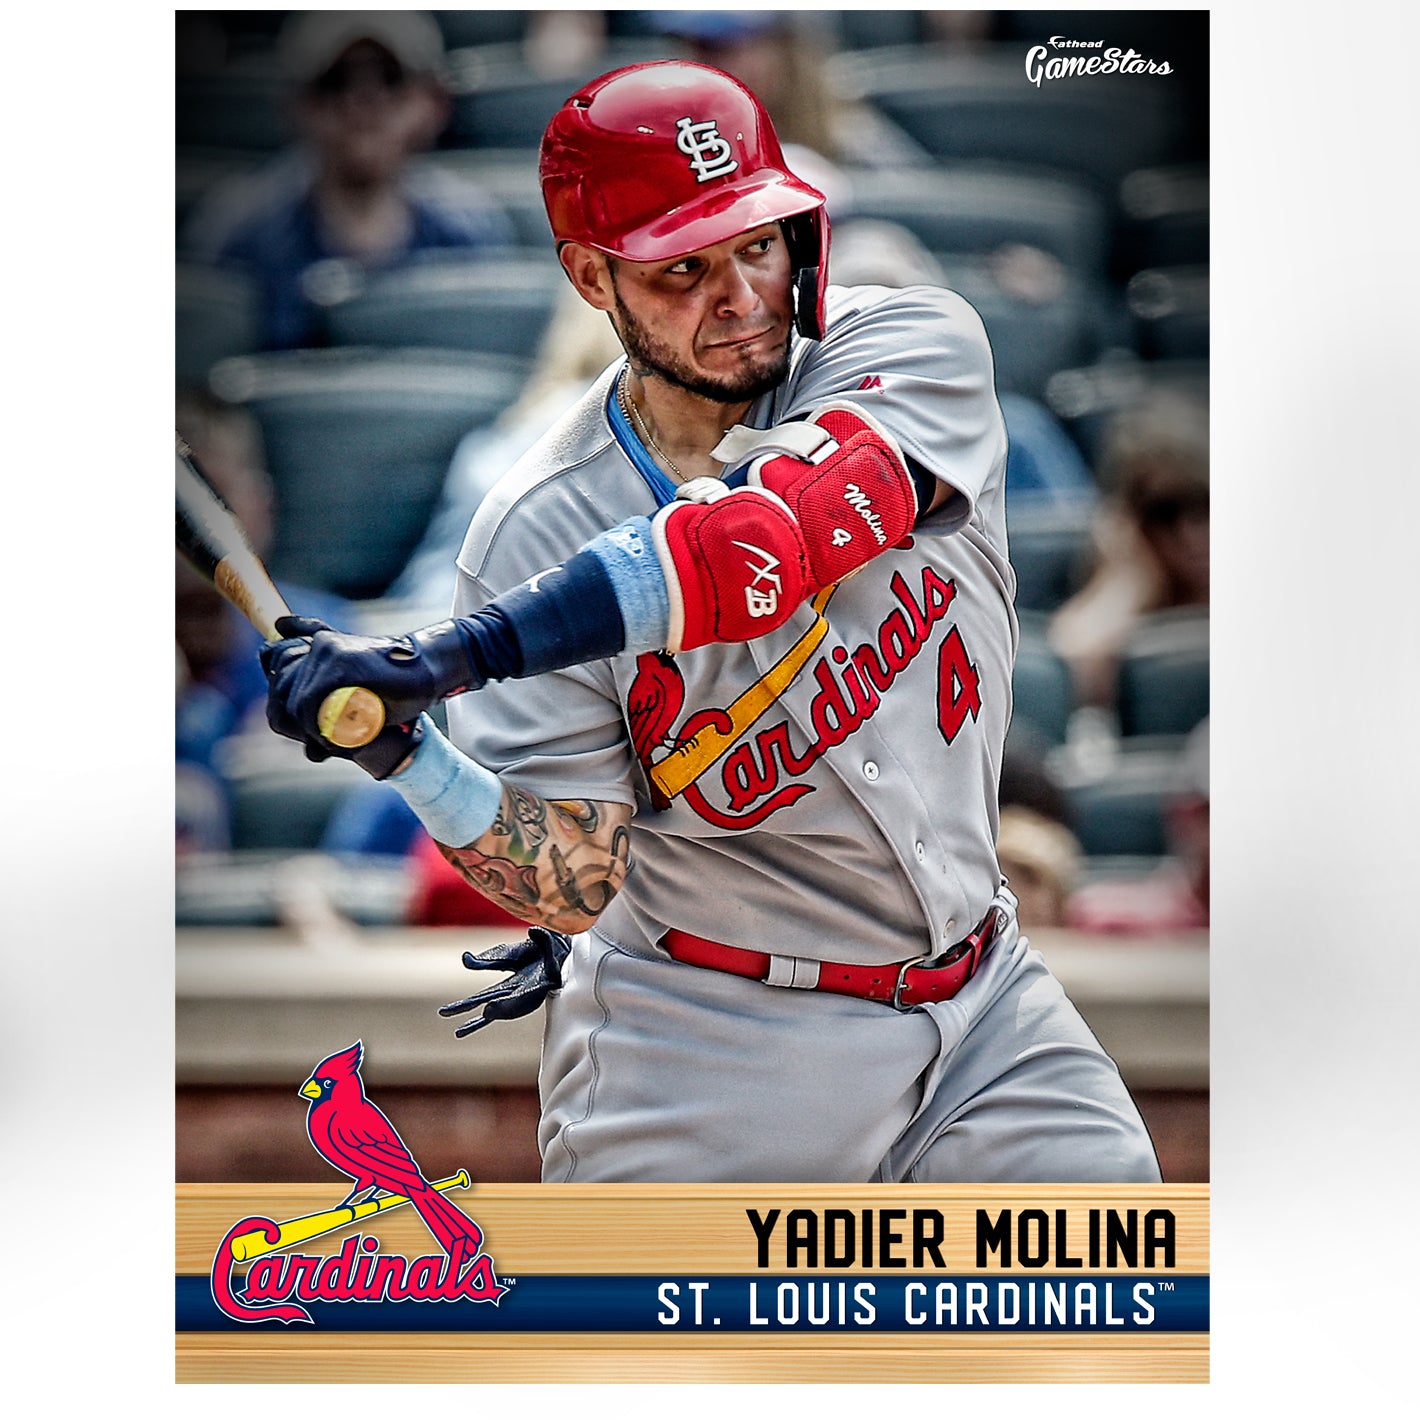 St. Louis Cardinals: Yadier Molina 2021 GameStar - Officially Licensed